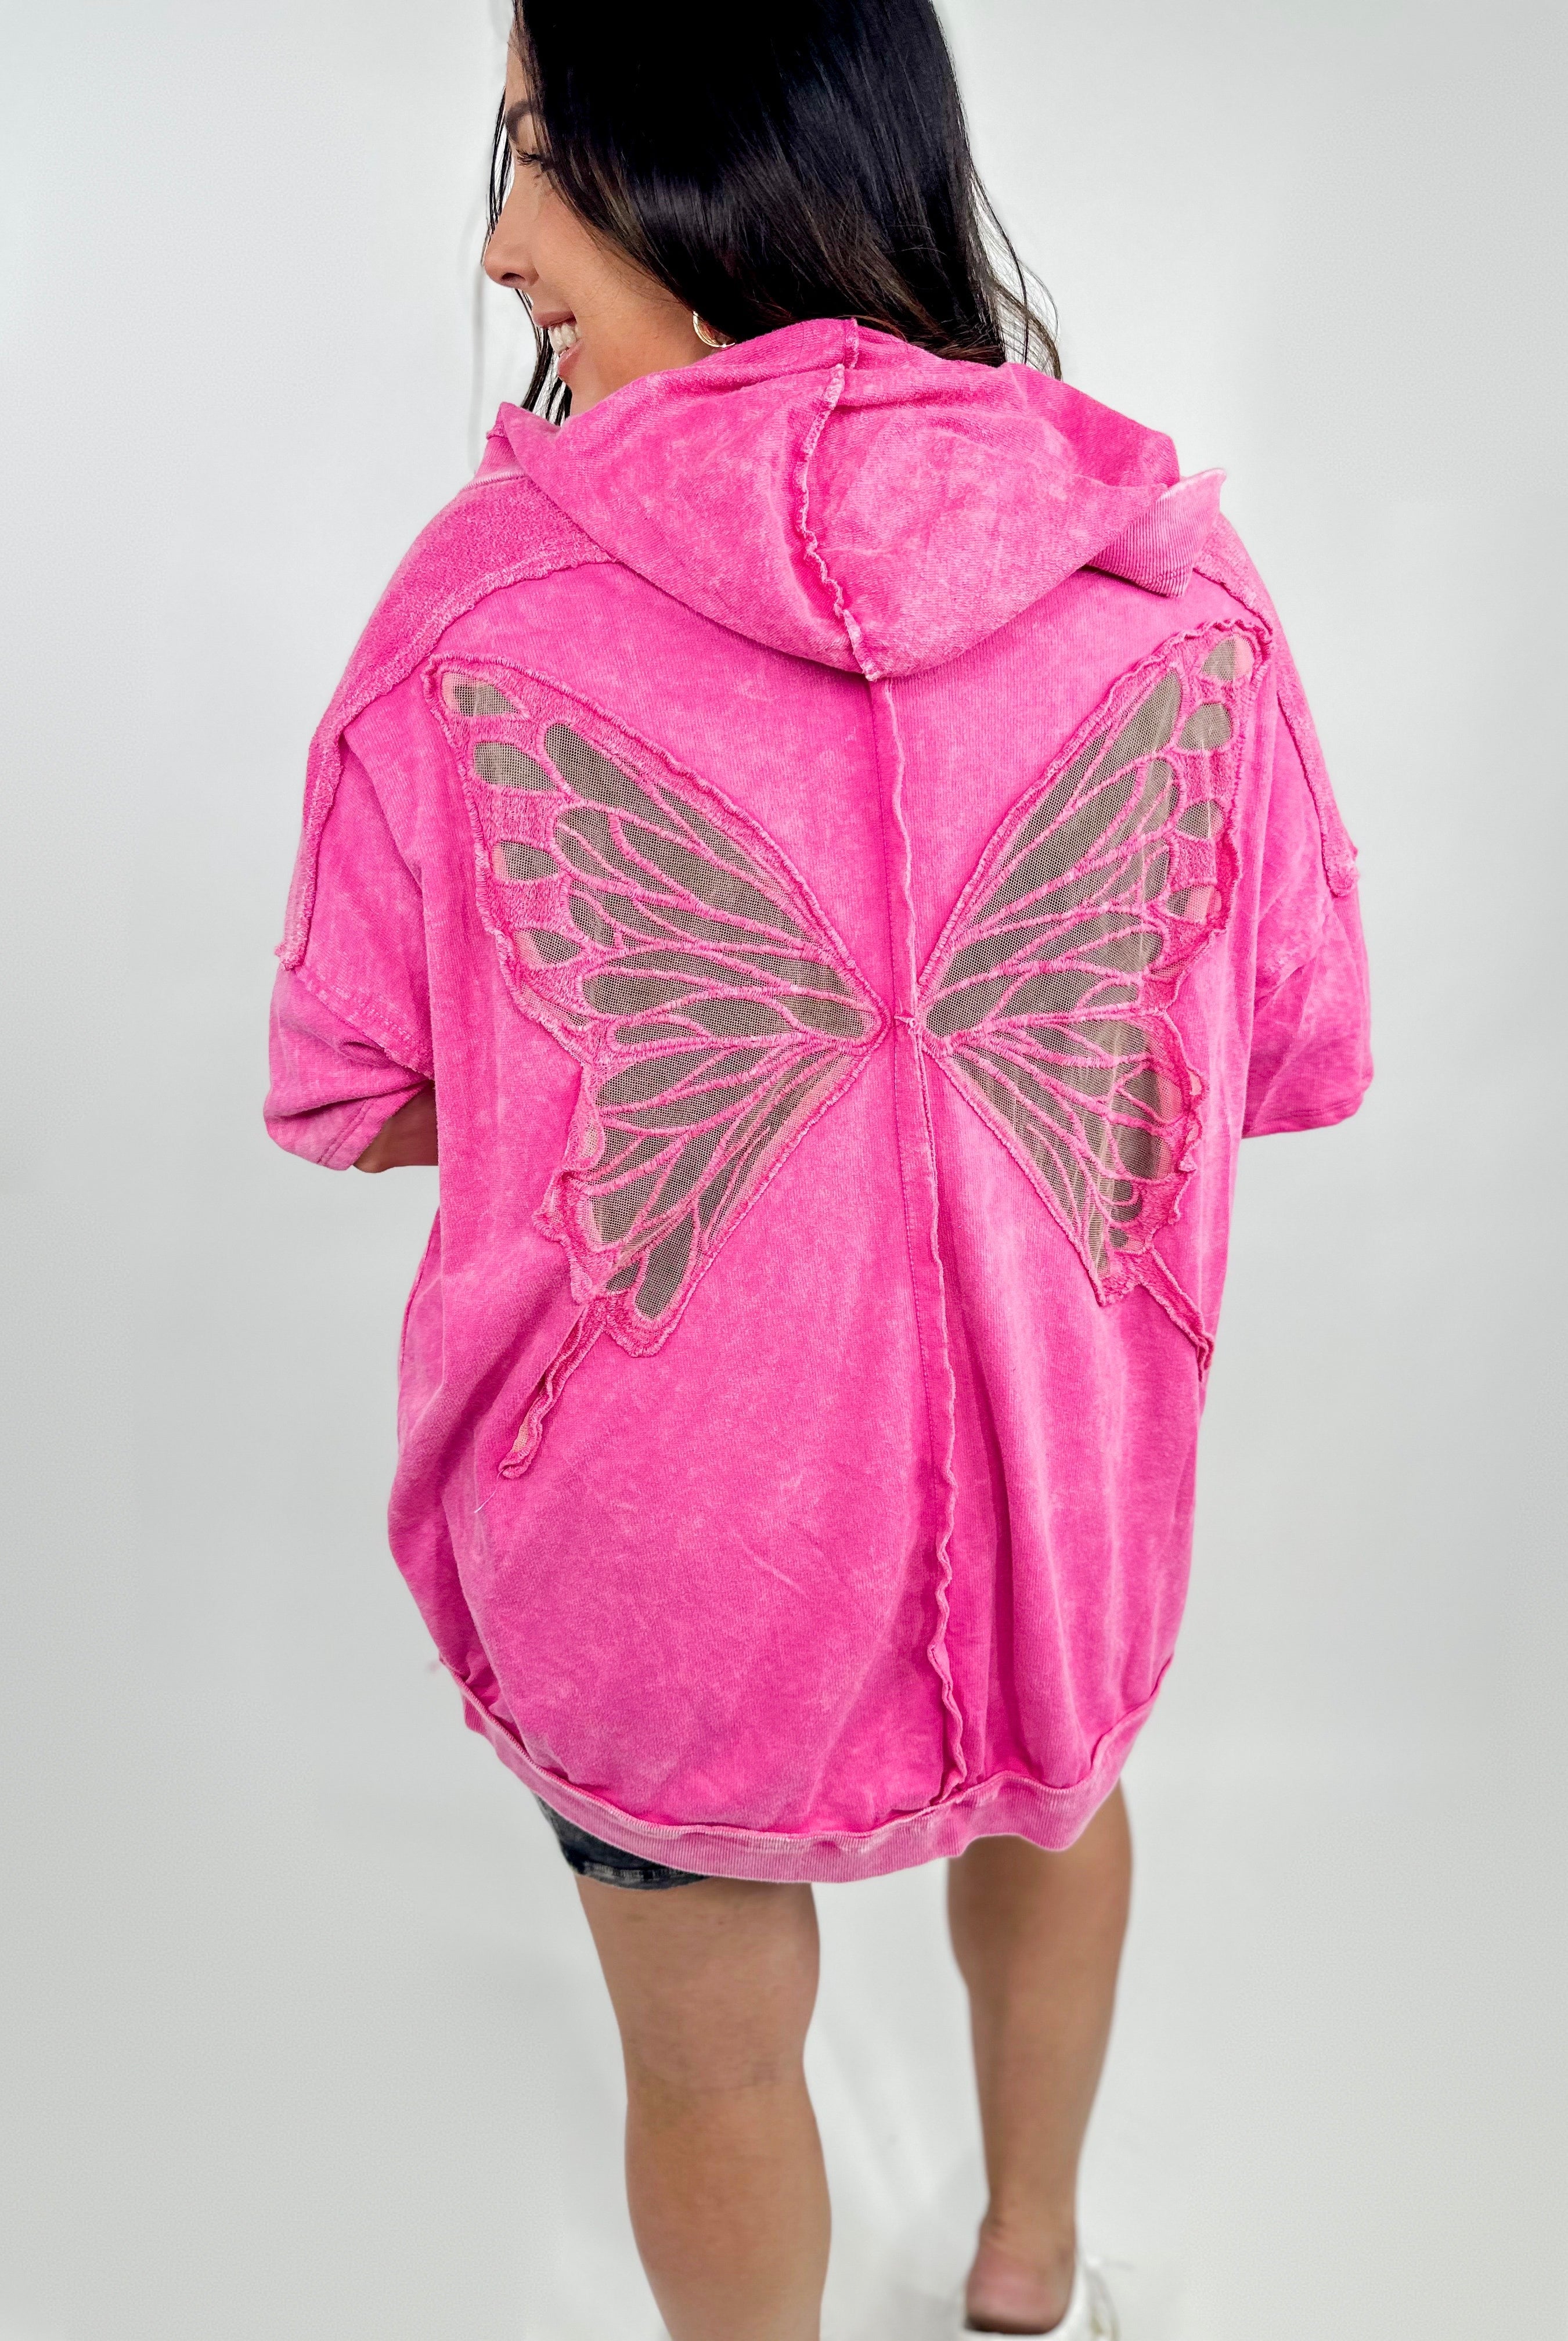 Mariposa Cardigan Hoodie - Hot Pink-210 Hoodies-J. Her-Heathered Boho Boutique, Women's Fashion and Accessories in Palmetto, FL